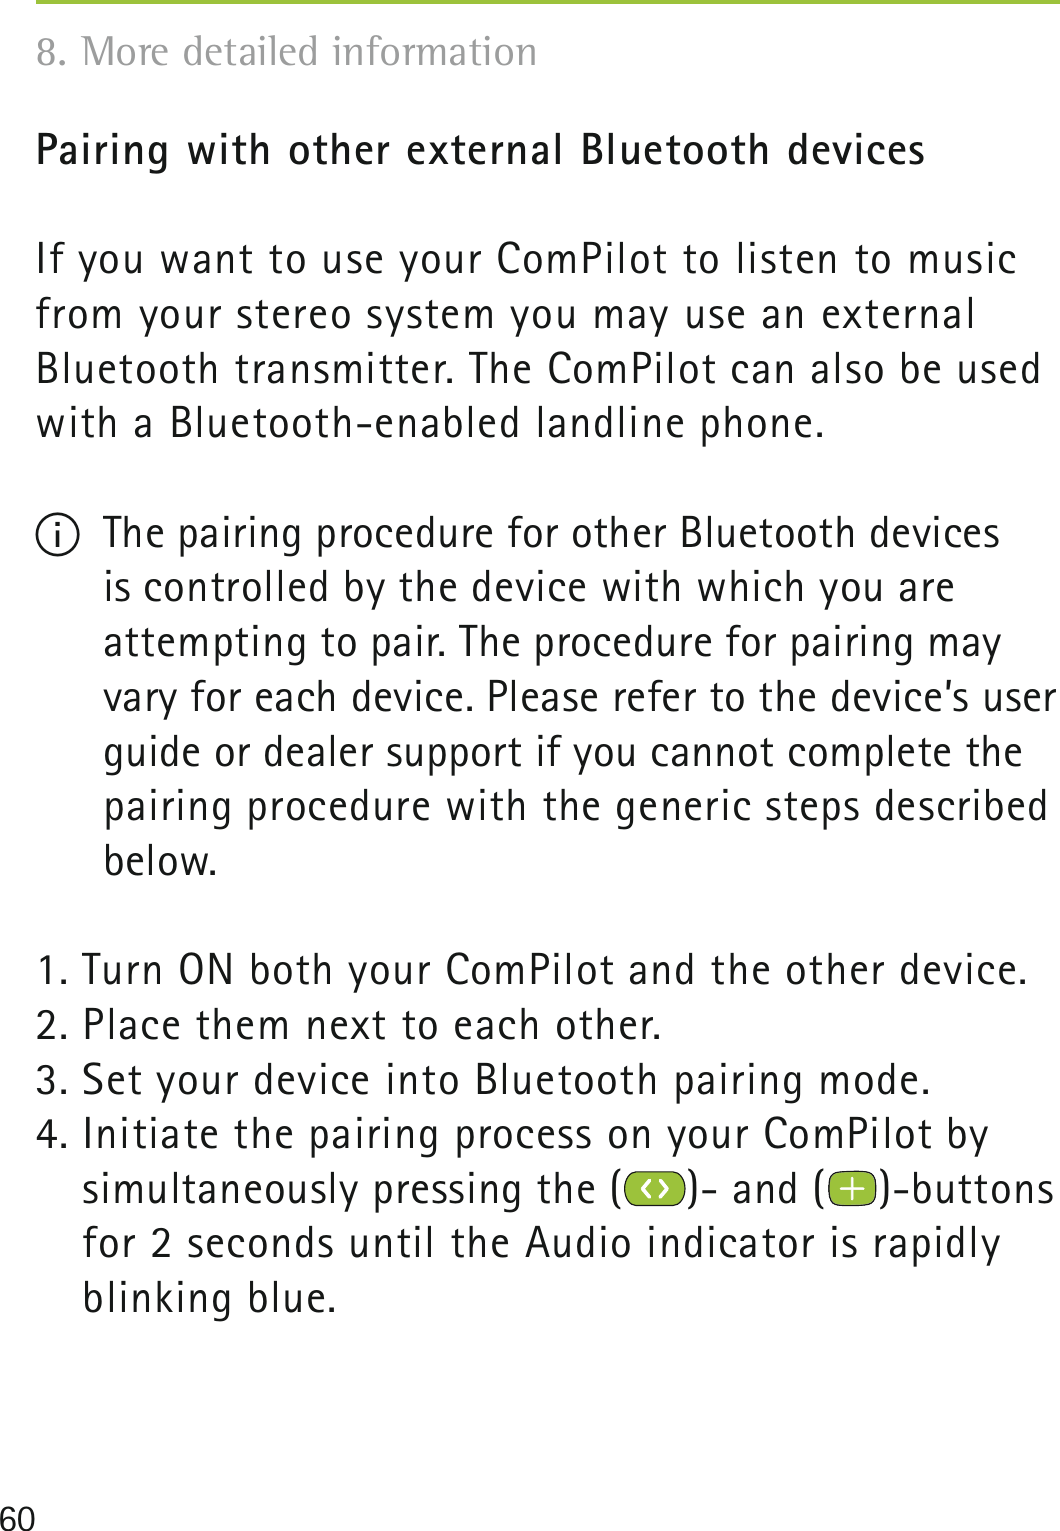 60Pairing with other external Bluetooth devicesIf you want to use your ComPilot to listen to music from your stereo system you may use an external  Bluetooth transmitter. The ComPilot can also be used with a Bluetooth-enabled landline phone.I  The pairing procedure for other Bluetooth devices  is controlled by the device with which you are  attempting to pair. The procedure for pairing may vary for each device. Please refer to the device’s user guide or dealer support if you cannot complete the pairing procedure with the generic steps described below. 1. Turn ON both your ComPilot and the other device.2. Place them next to each other. 3. Set your device into Bluetooth pairing mode.4. Initiate the pairing process on your ComPilot by  simultaneously pressing the ( )- and ( )-buttons for 2 seconds until the Audio indicator is rapidly blinking blue.8. More detailed information 